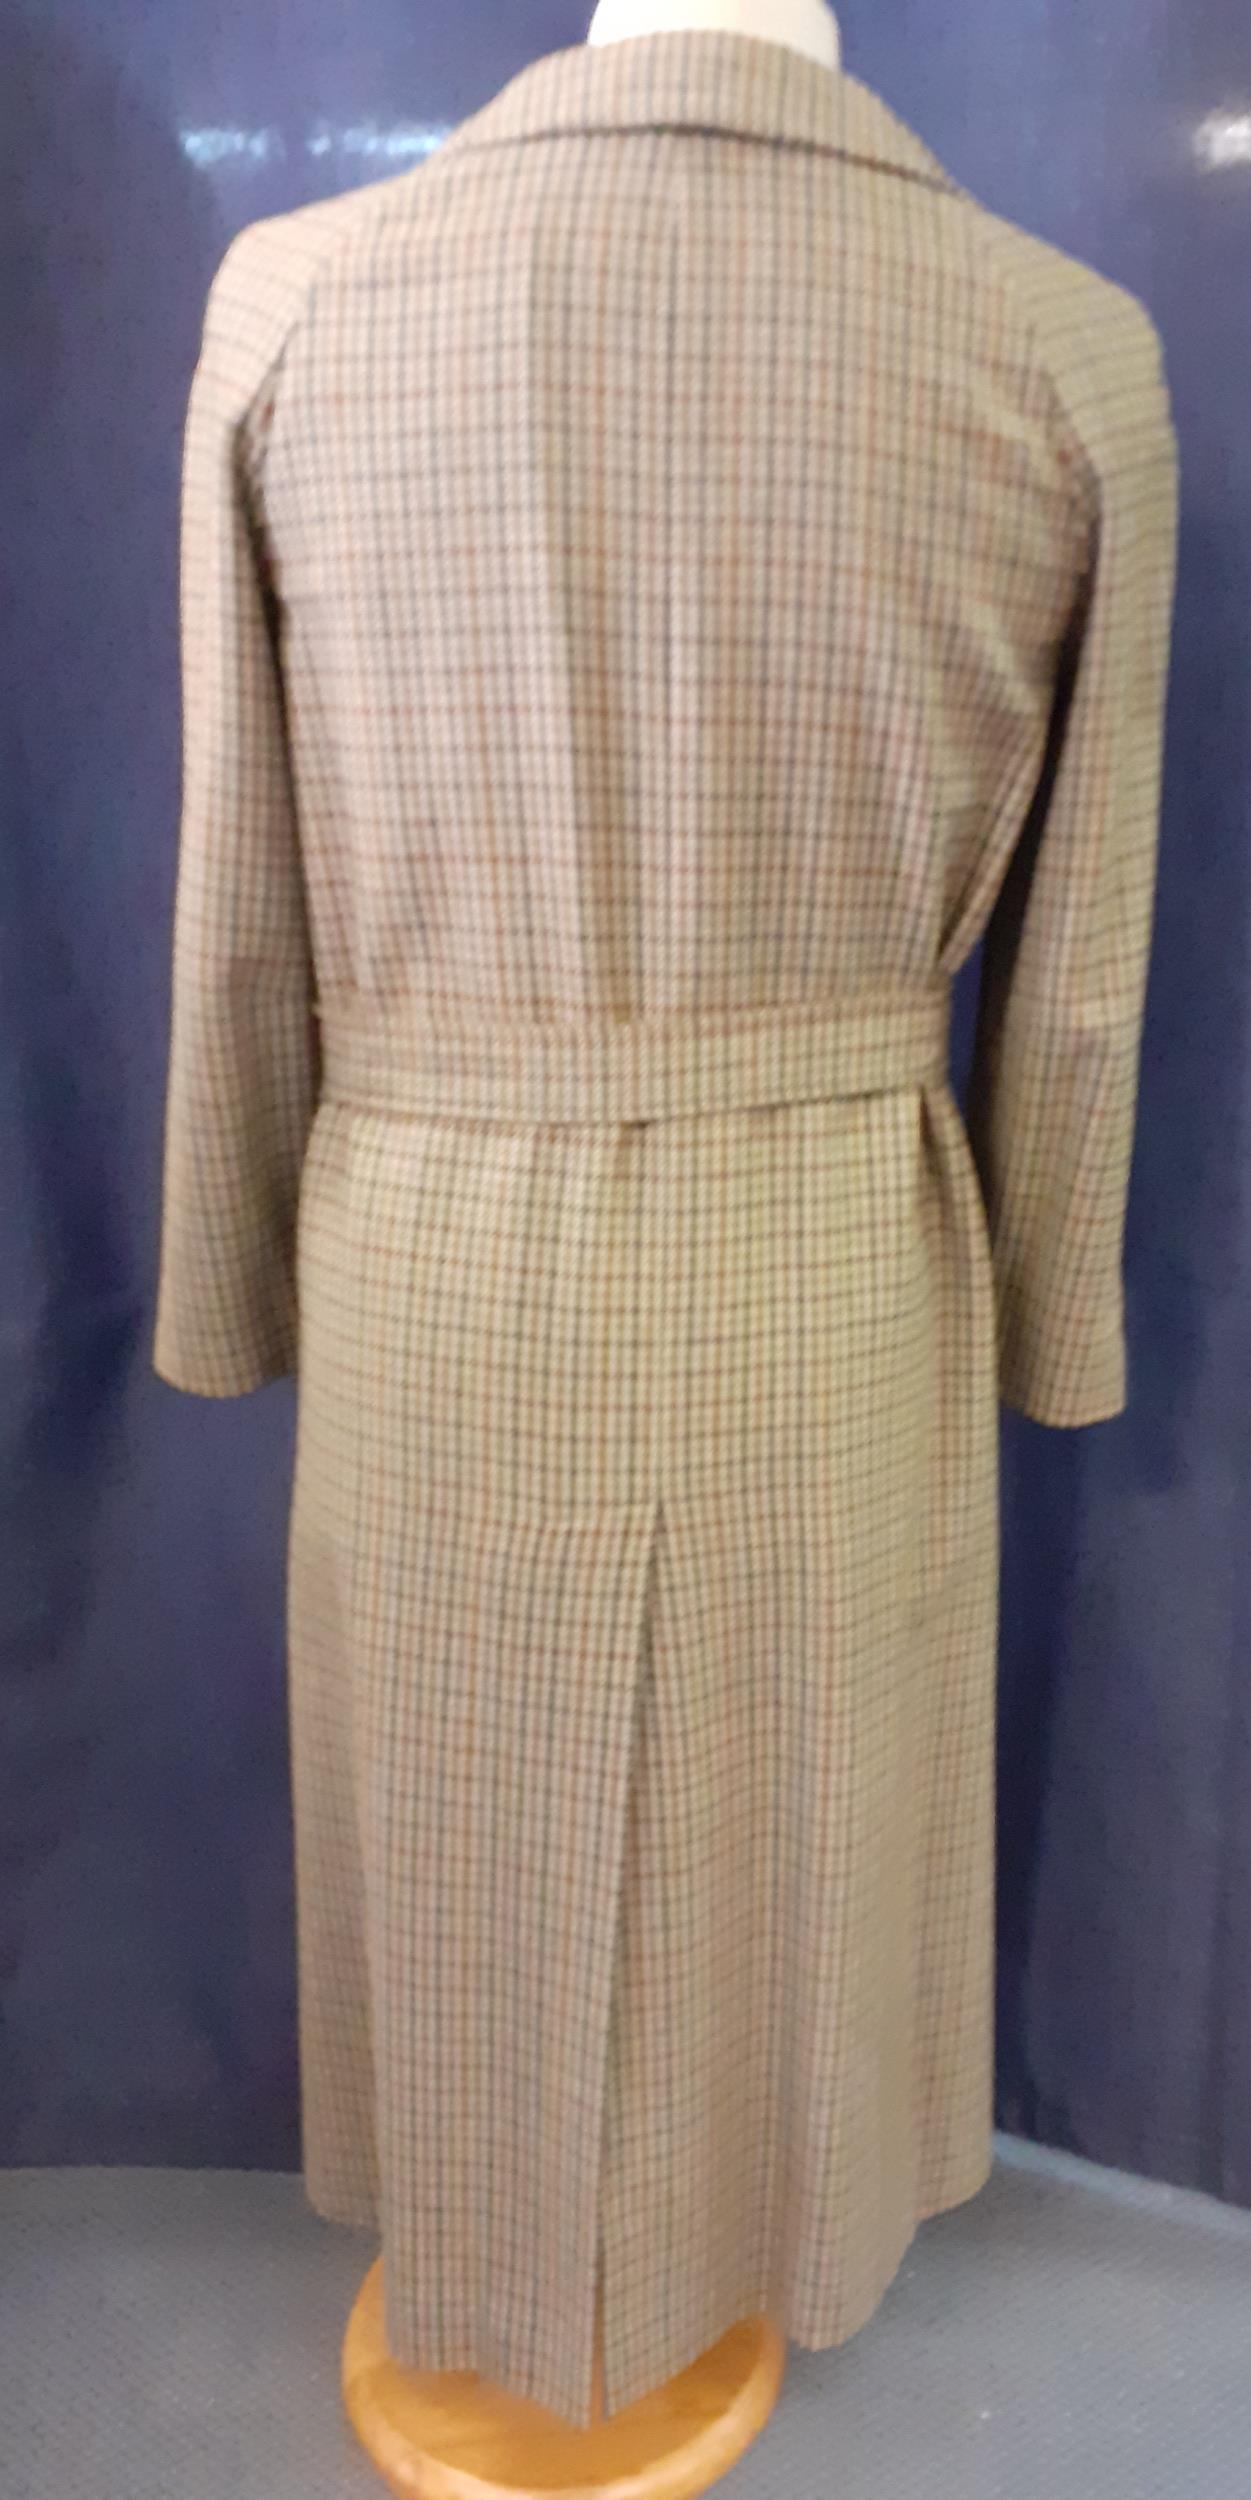 Aquascutum- A 1970's woollen coat in iconic tweed, 38" chest x 47" long, with 2 front pockets and - Image 3 of 9